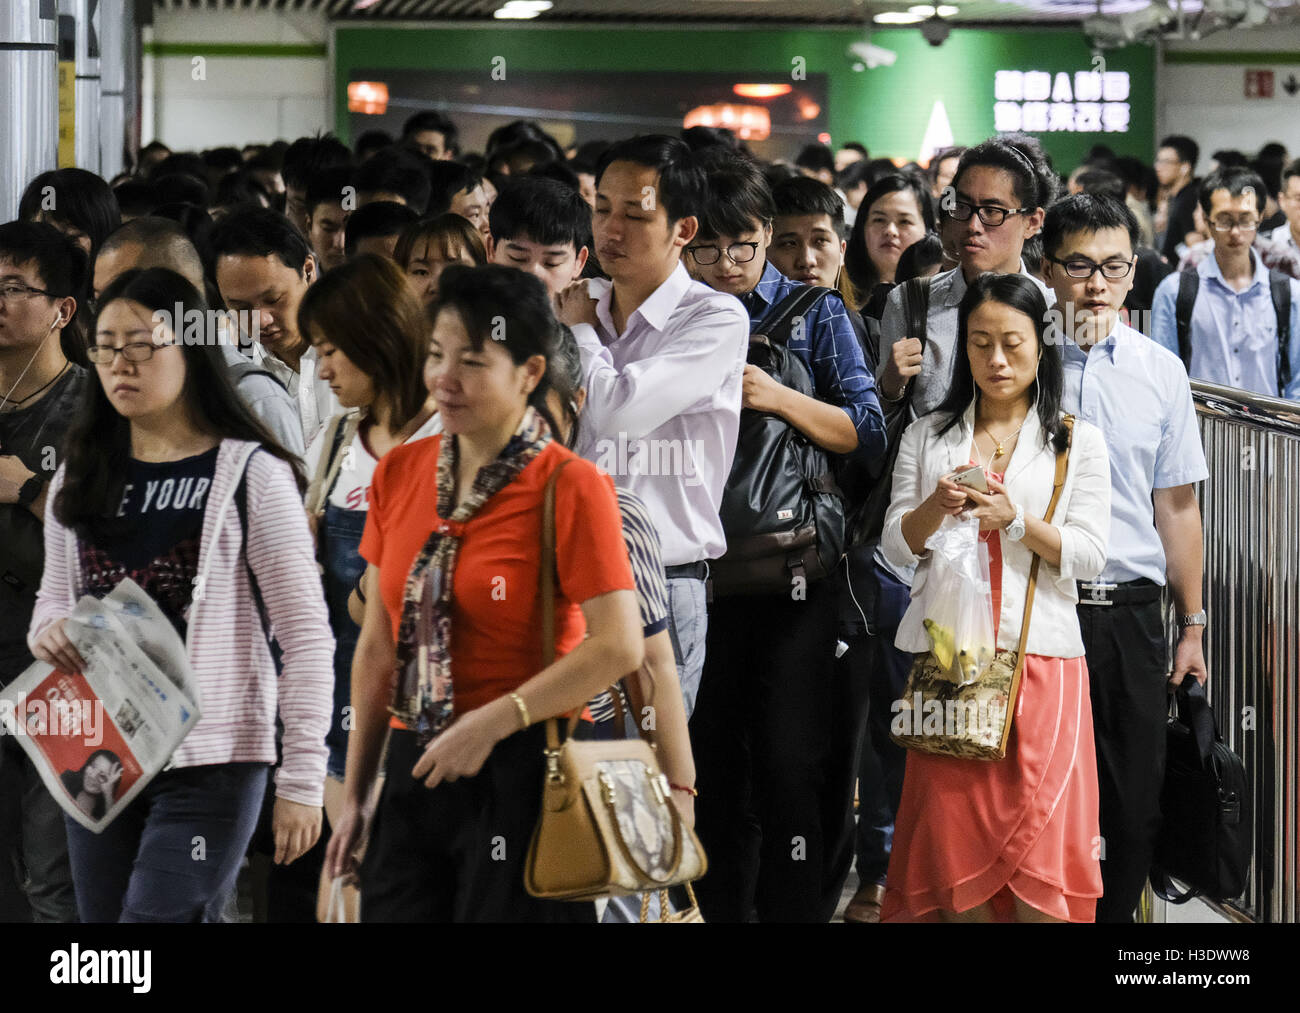 September 11, 2016 - Los Angeles, California, U.S - People rush to work and school at subway station on Monday morning in Shanghai, China. Shanghai is the most populous city in China and the most populous city proper in the world. It is one of the four direct-controlled municipalities of China, with a population of more than 24 million as of 2014. It is a global financial centre, and a transport hub with the world's busiest container port. Located in the Yangtze River Delta in East China, Shanghai sits on the south edge of the mouth of the Yangtze in the middle portion of the Chinese coast. Th Stock Photo